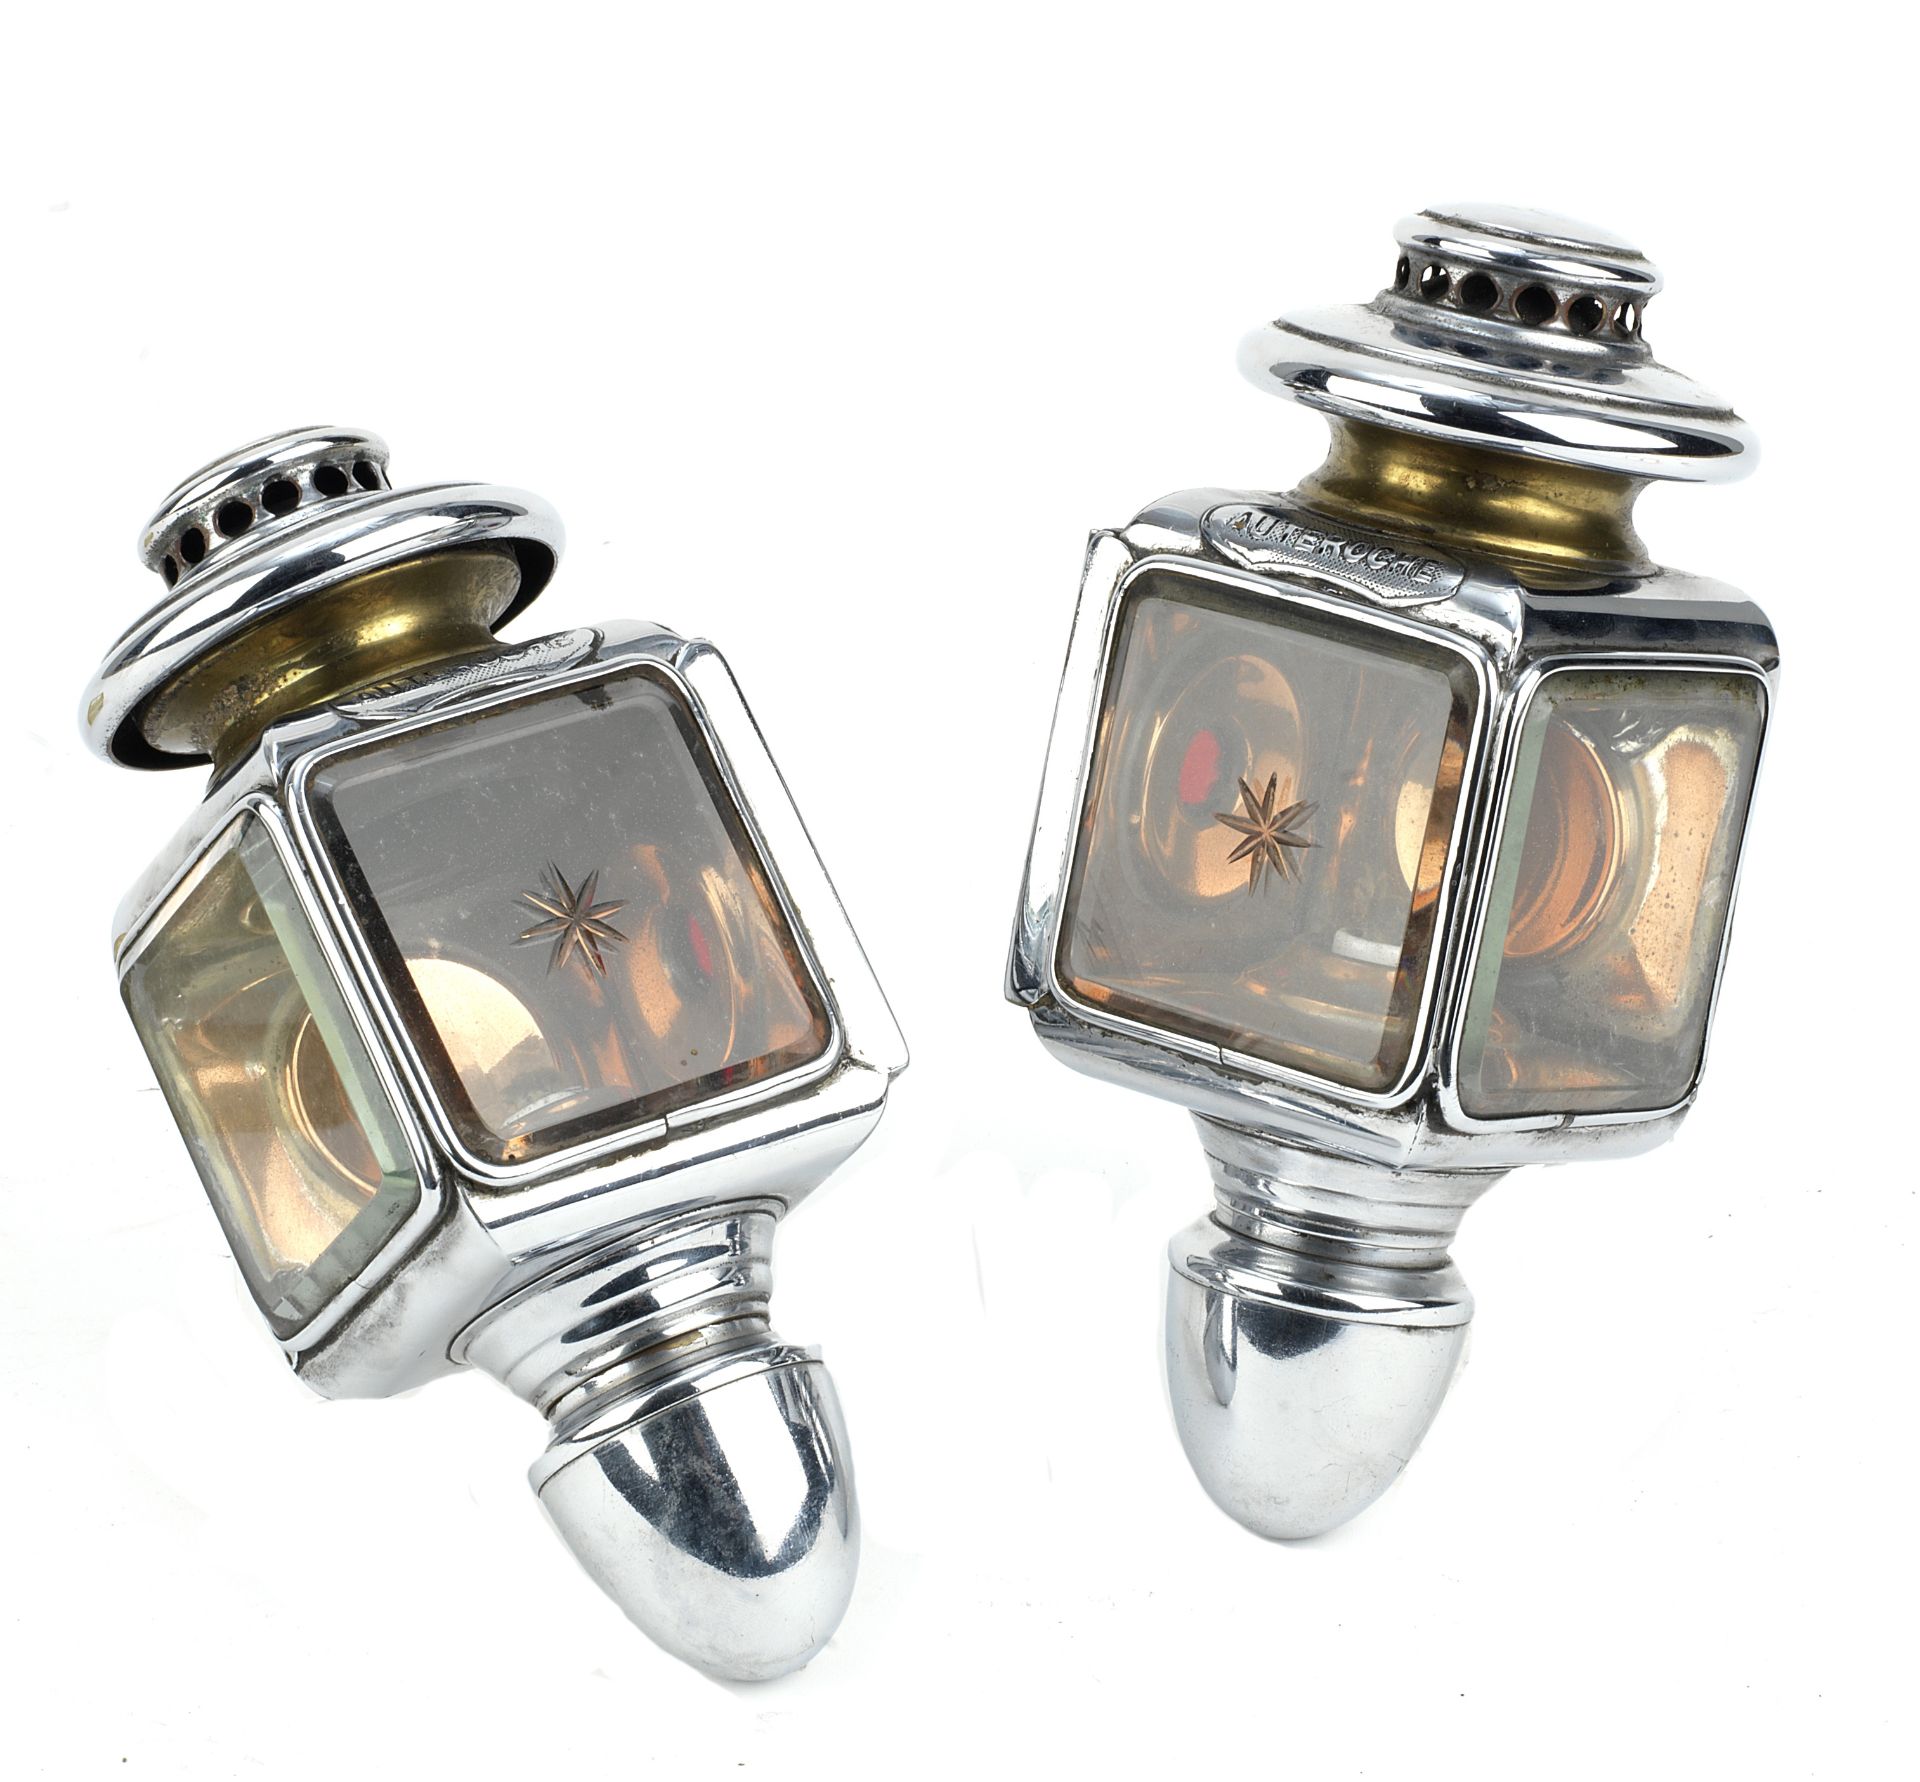 A pair of 'Auteroche' oil-illuminating opera lamps, French, ((2))